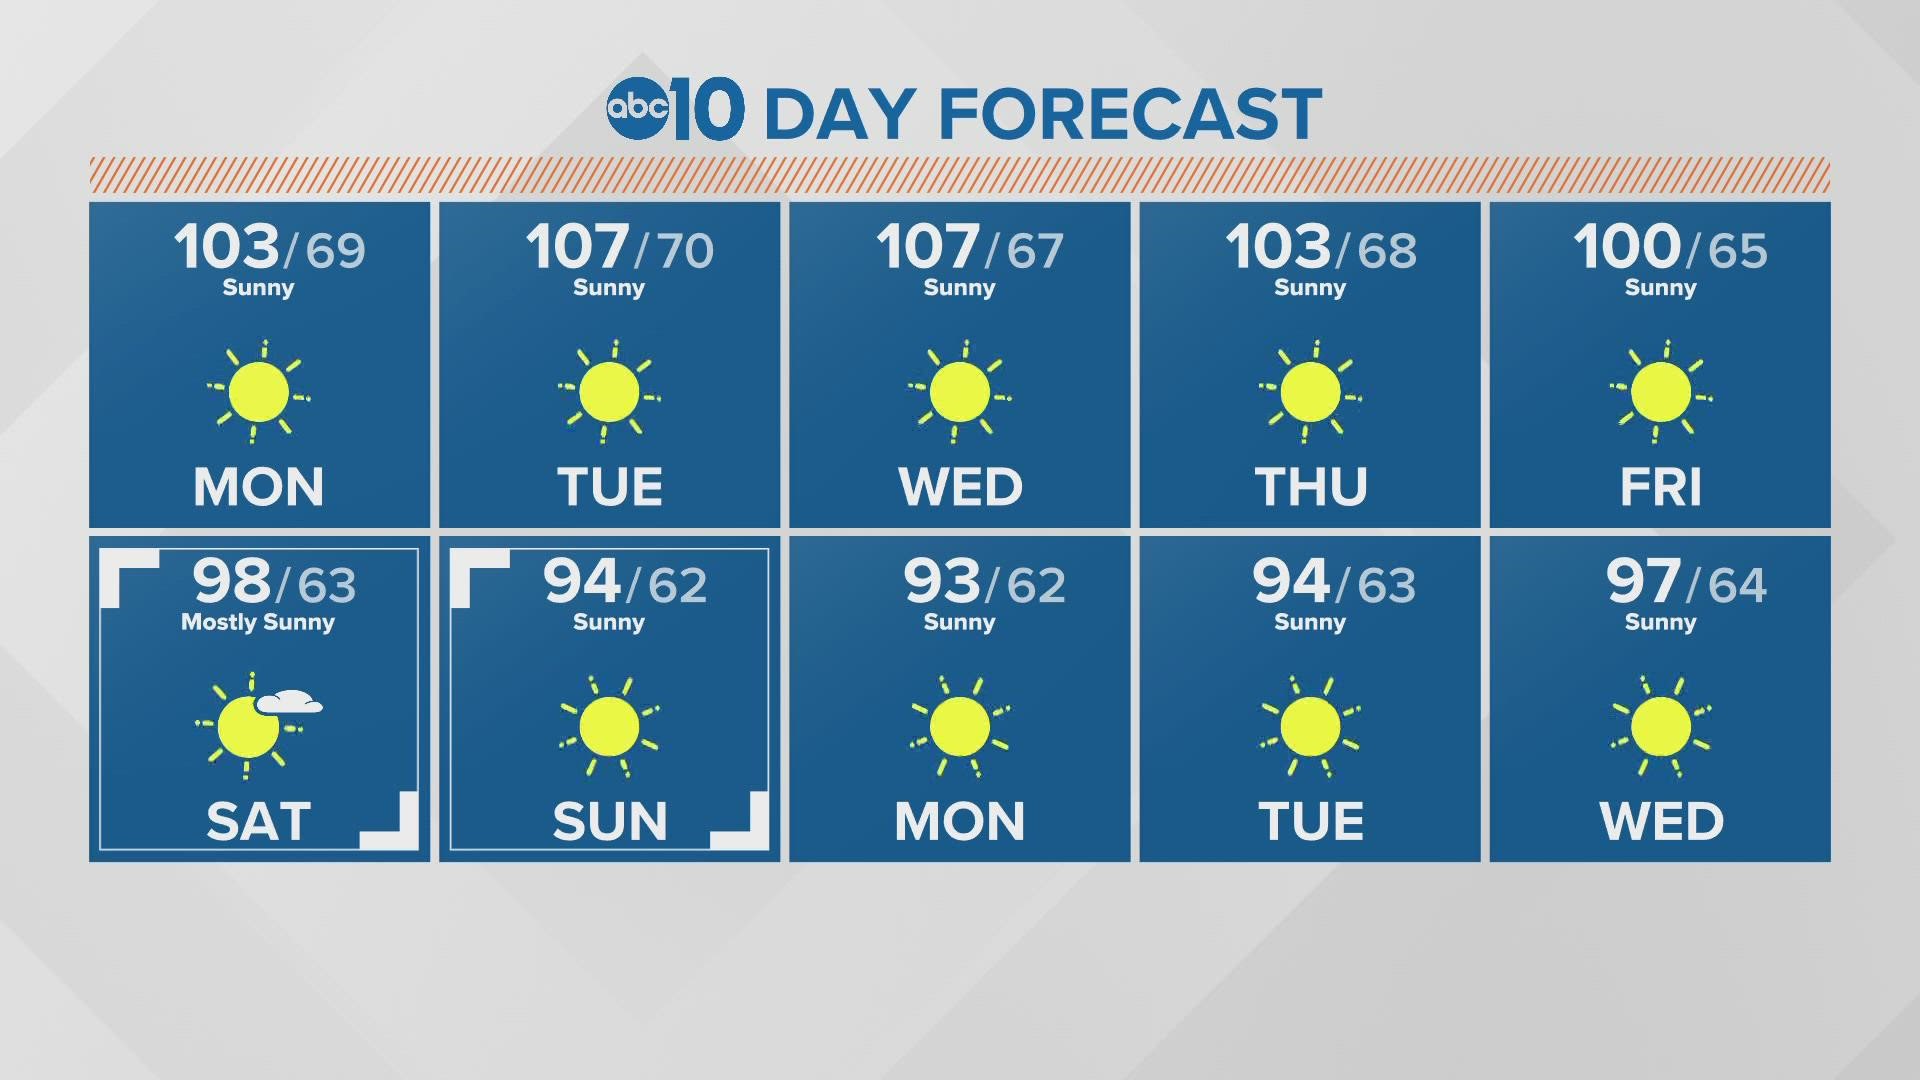 ABC10 Meteorologist Rob Carlmark tells us what to expect for the next 10 days of weather as temperatures reach well above 100°.